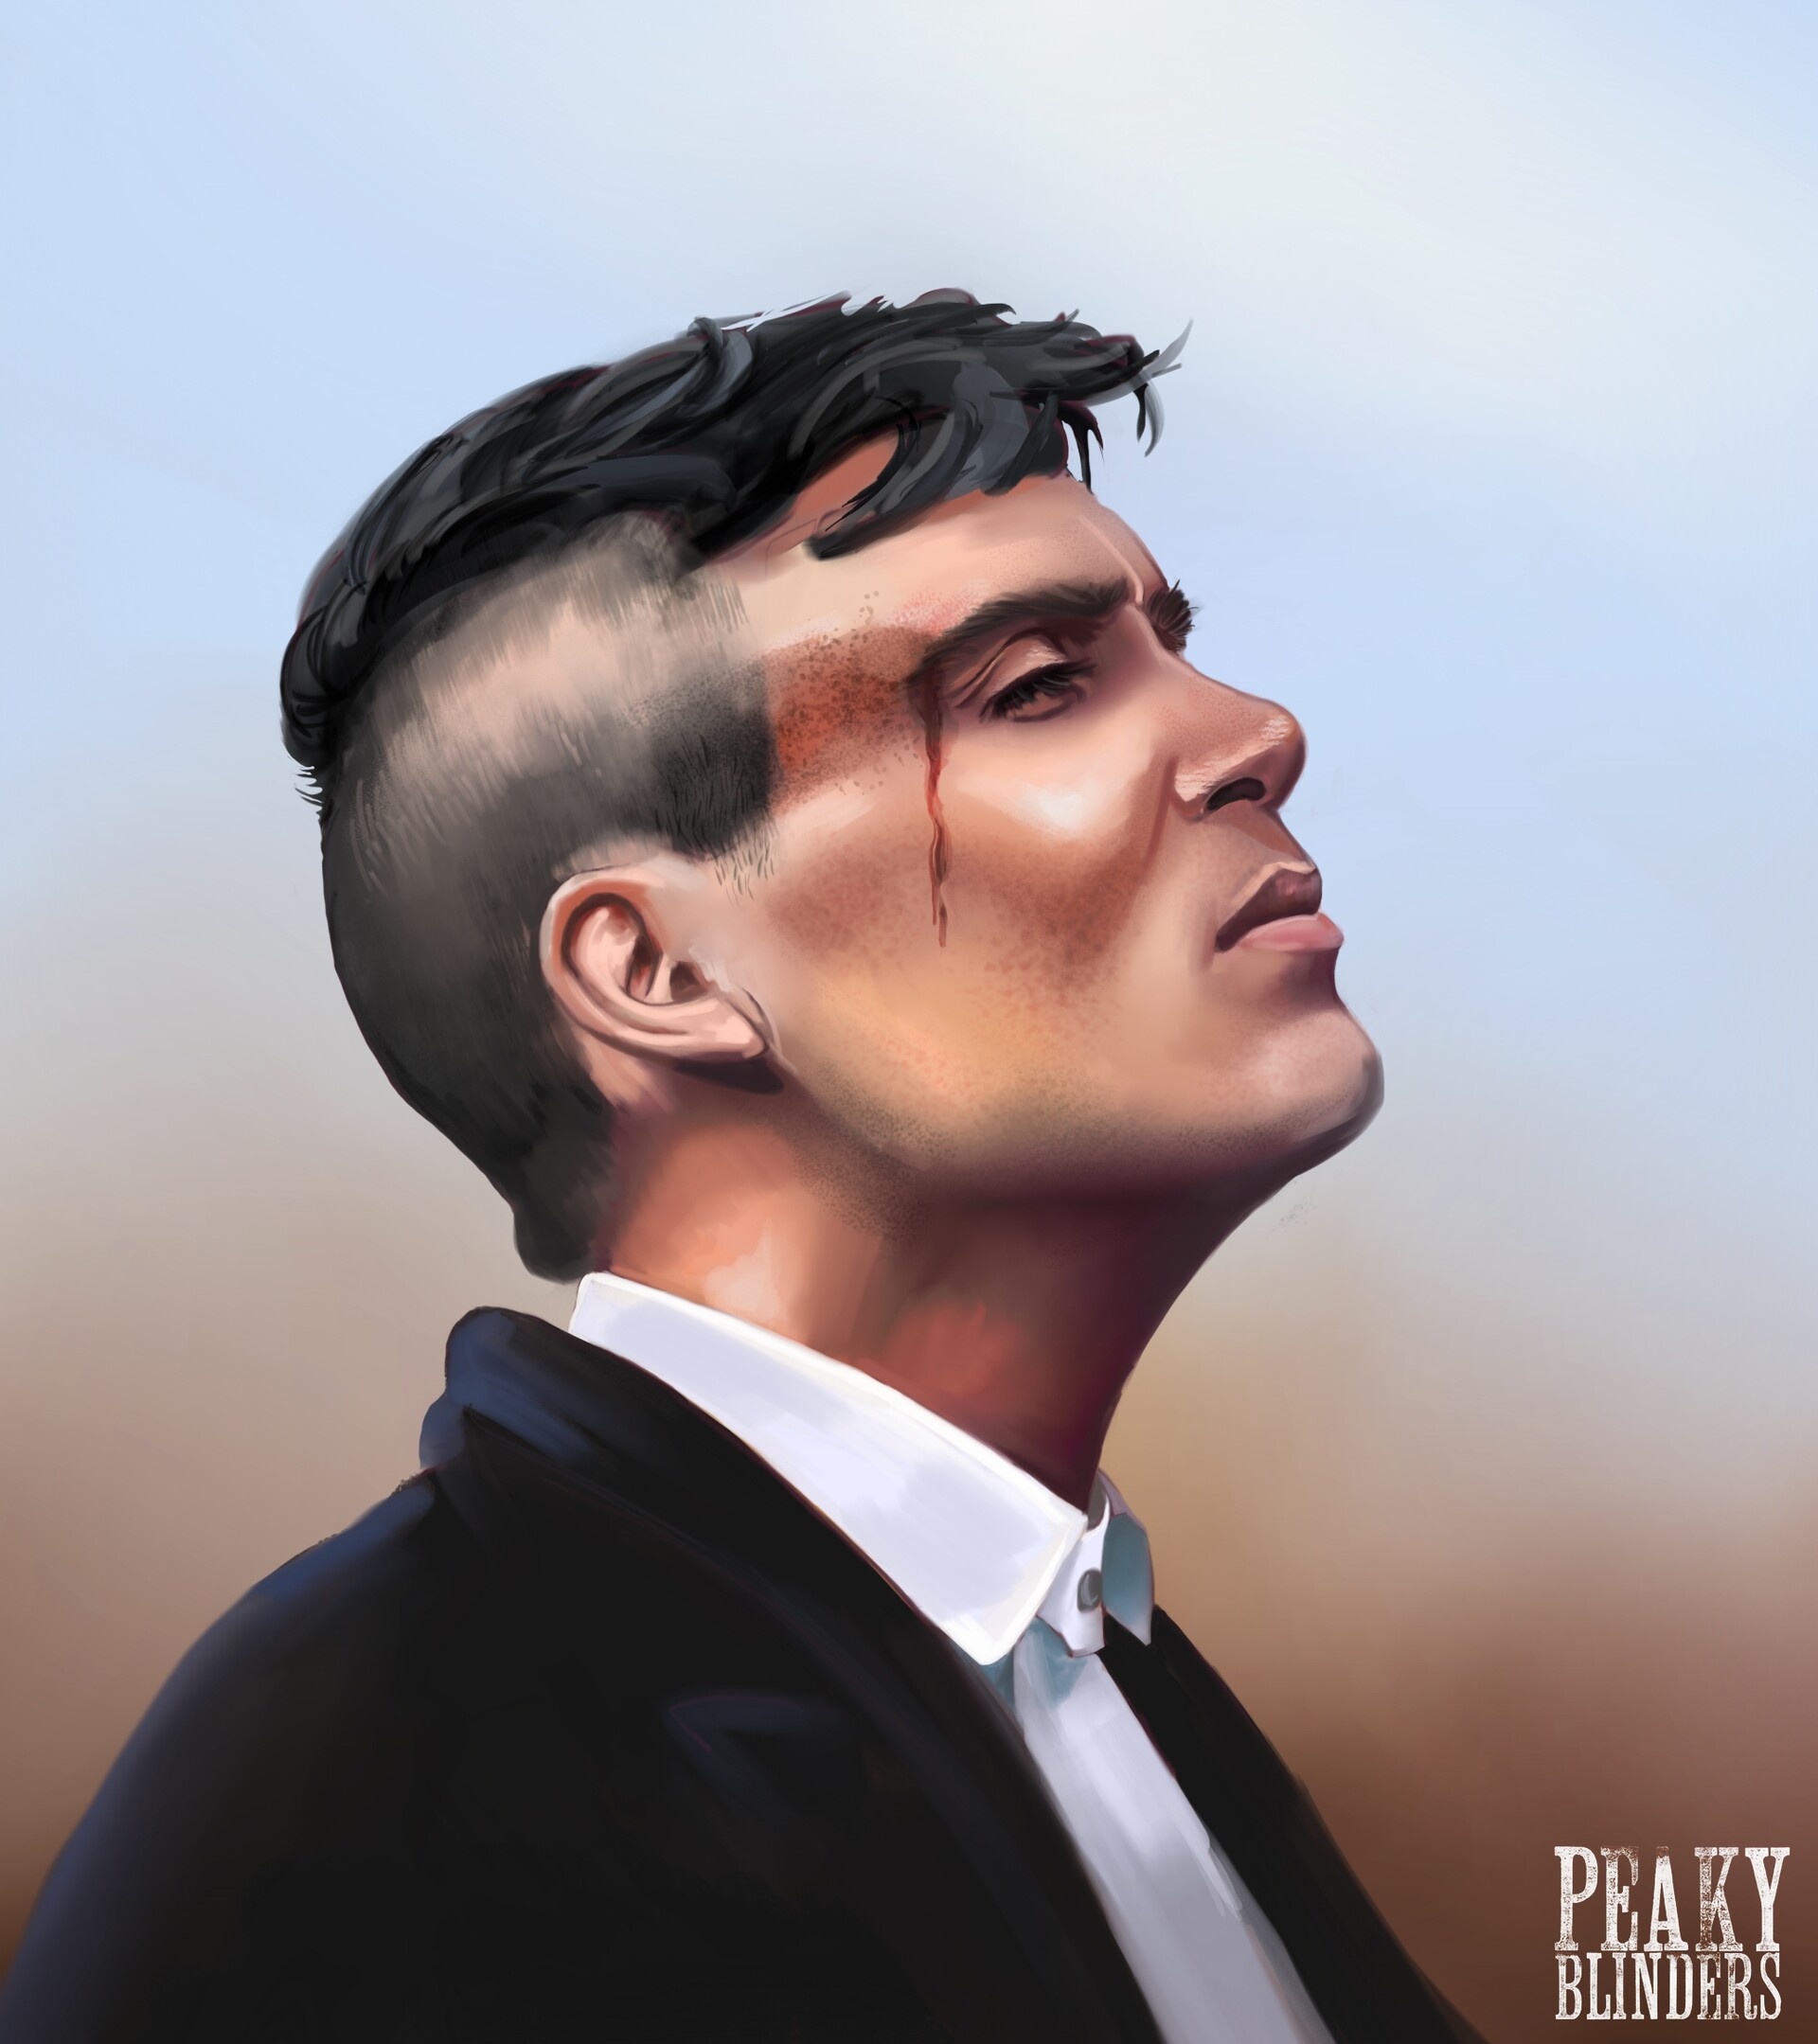 theonewiththefanfics — The Layers of Thomas Shelby - Unbreakable...